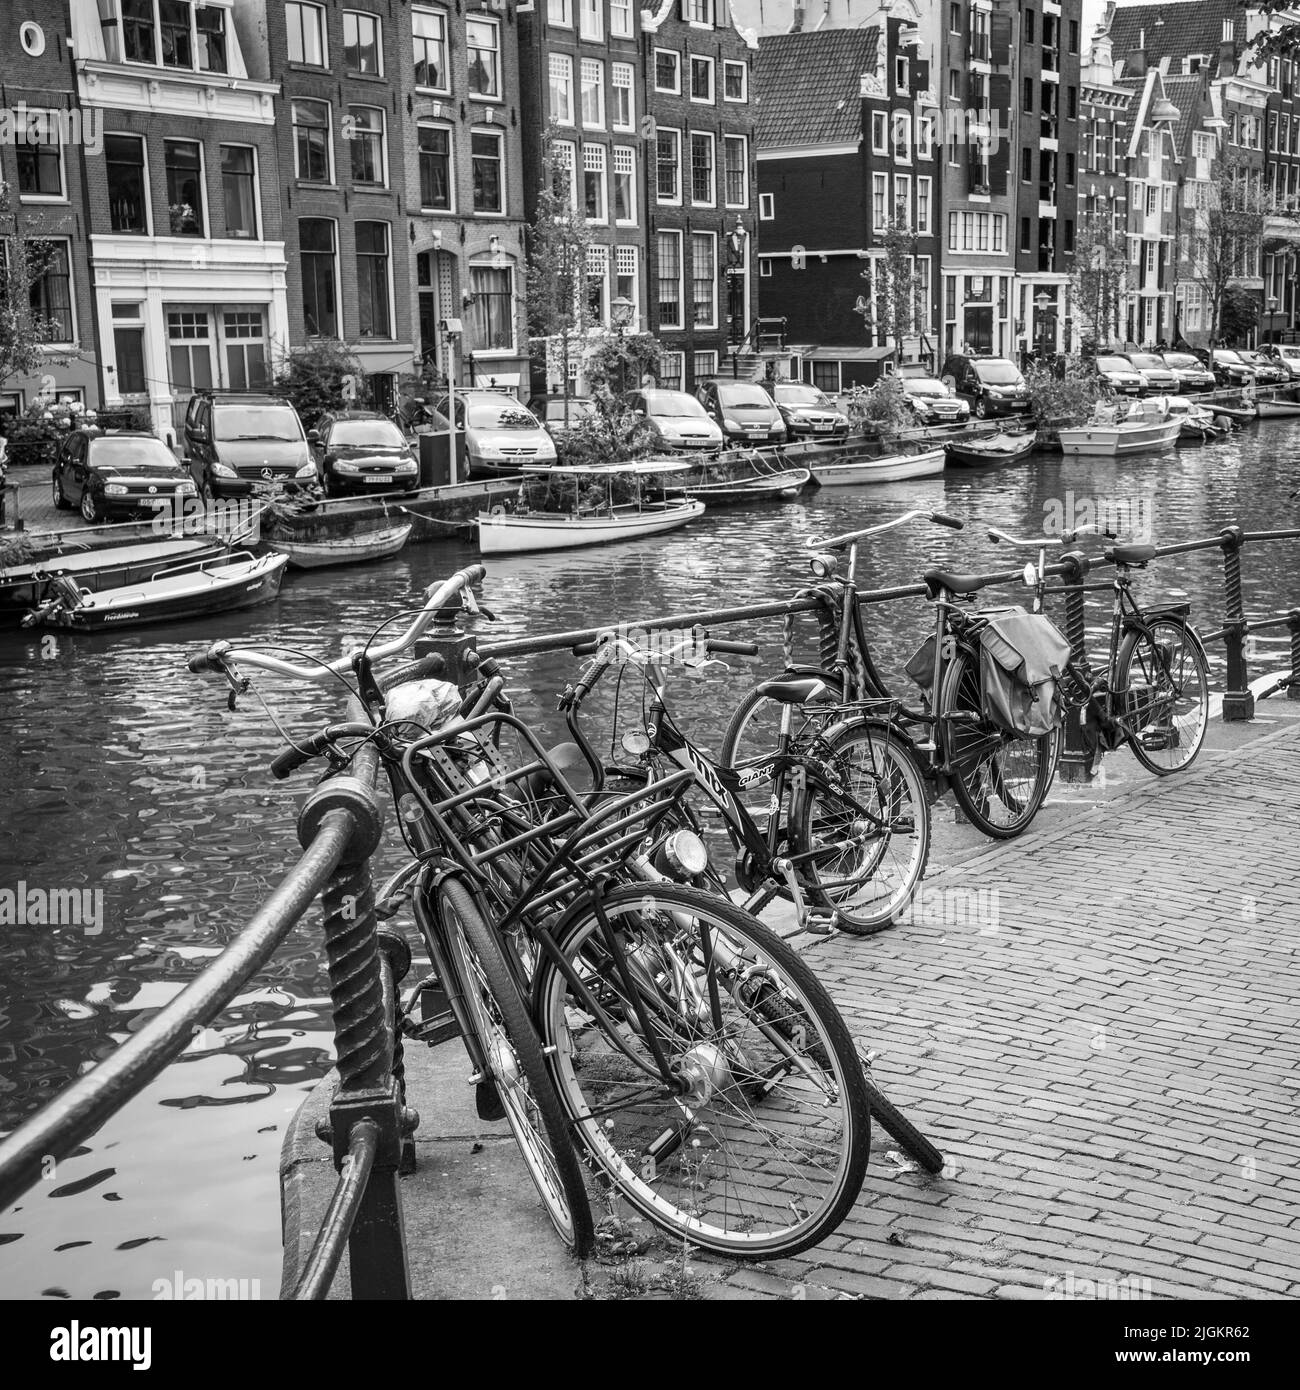 Amsterdam, Netherlands - September 9, 2011: Bicycles by canal railing in Amsterdam Stock Photo